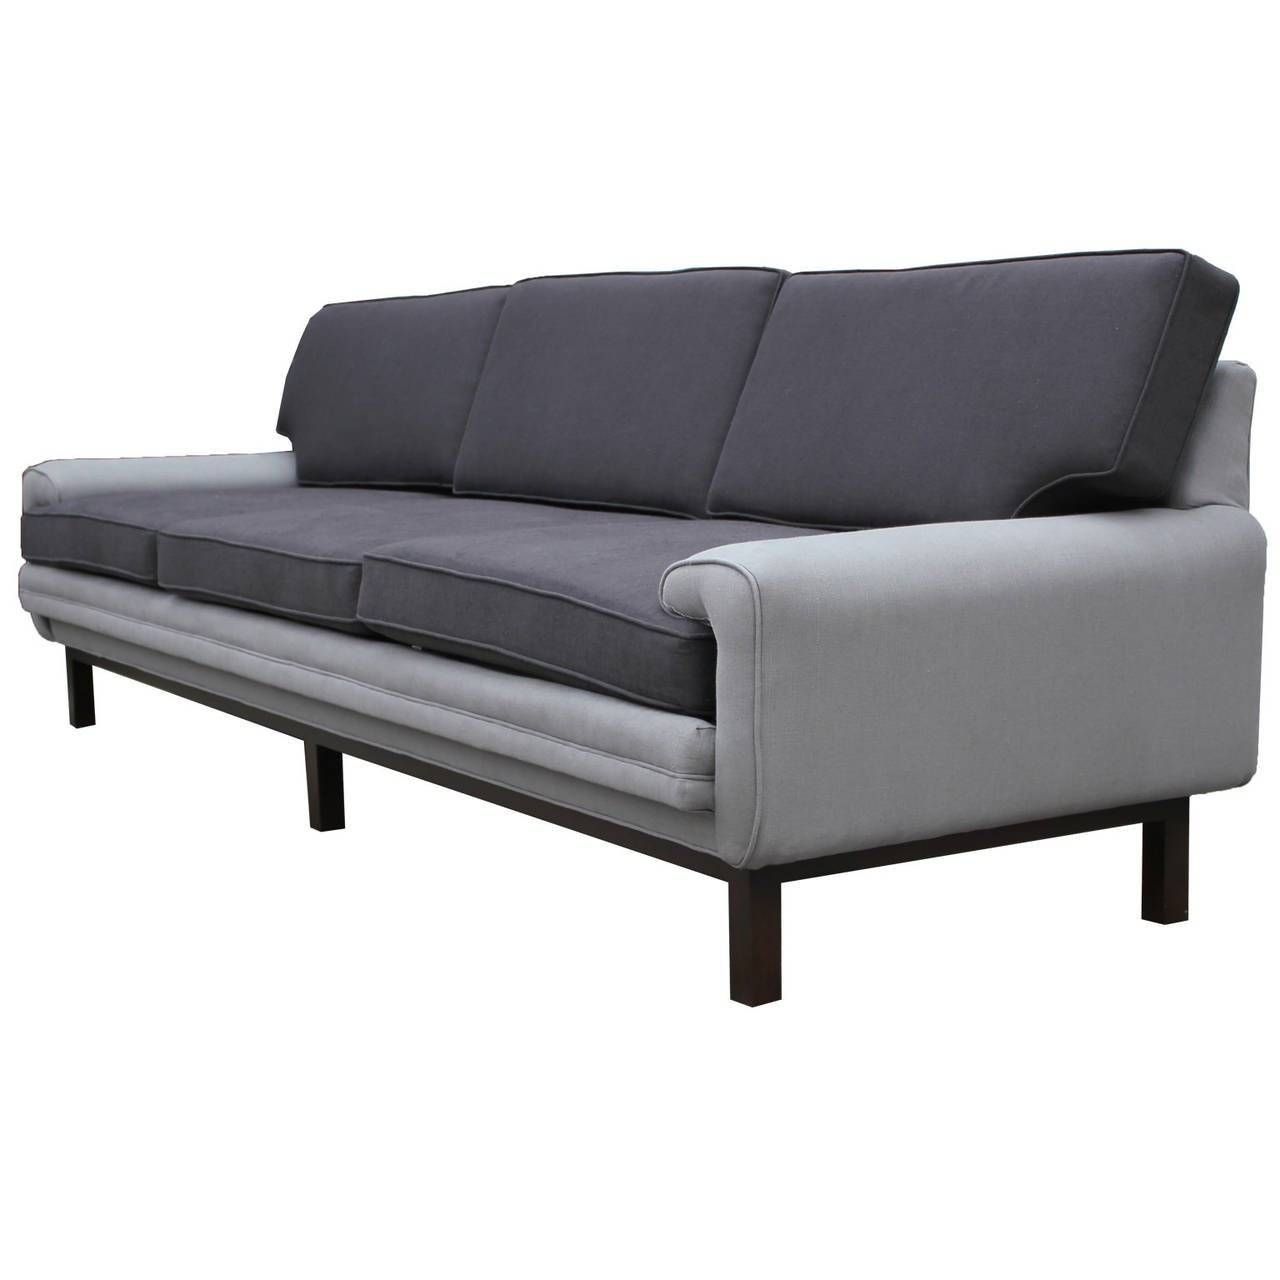 Interesting Two Tone Sofa At 1stdibs Within Two Tone Sofas (View 10 of 30)